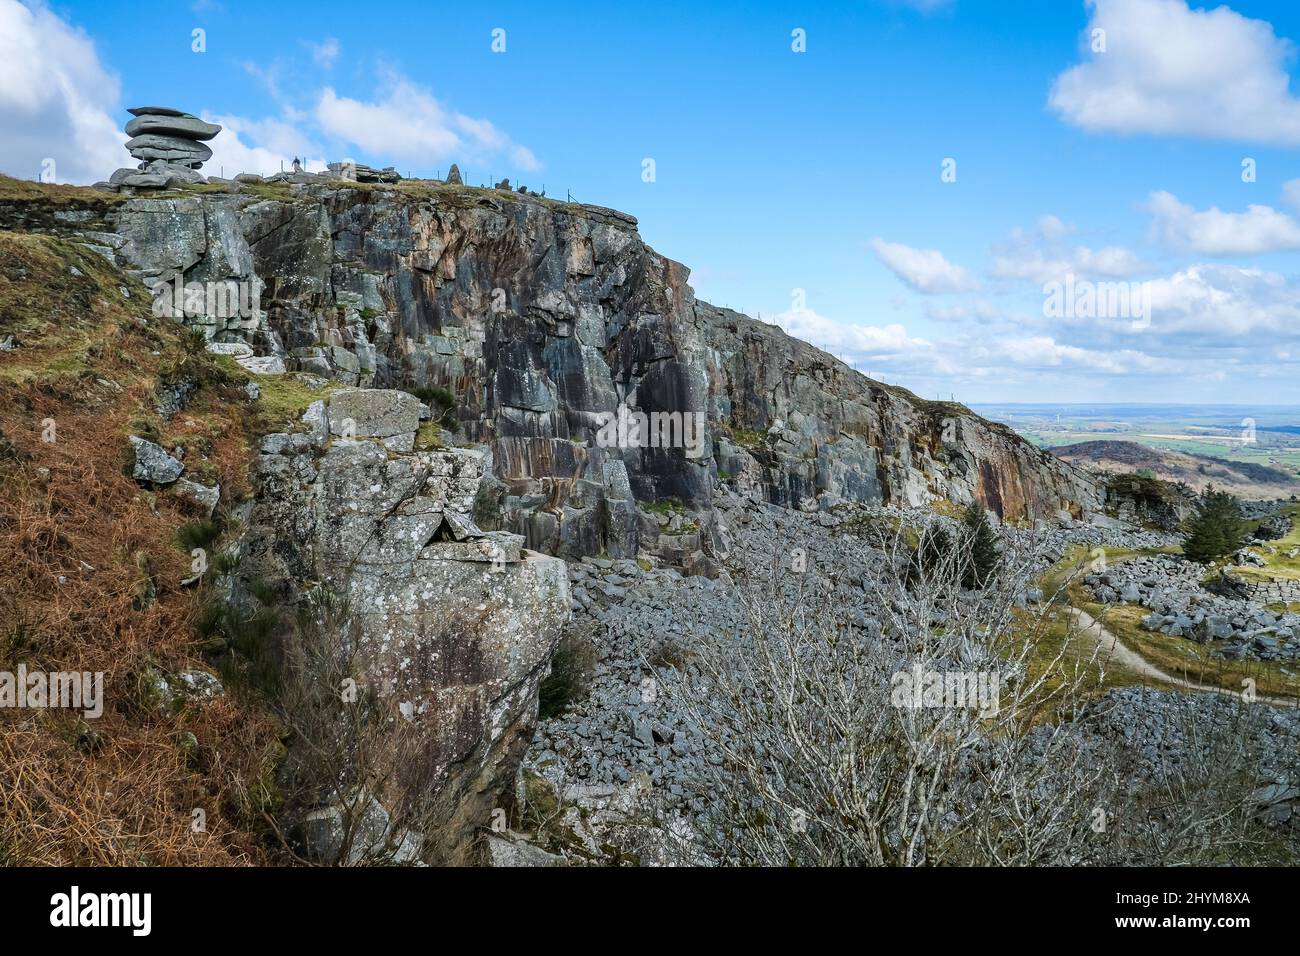 The Cheesewring rock stack on the edge of the remains of the disused Stowes Hill Quarry Cheesewring Quarry on Bodmin Moor in Cornwall. Stock Photo